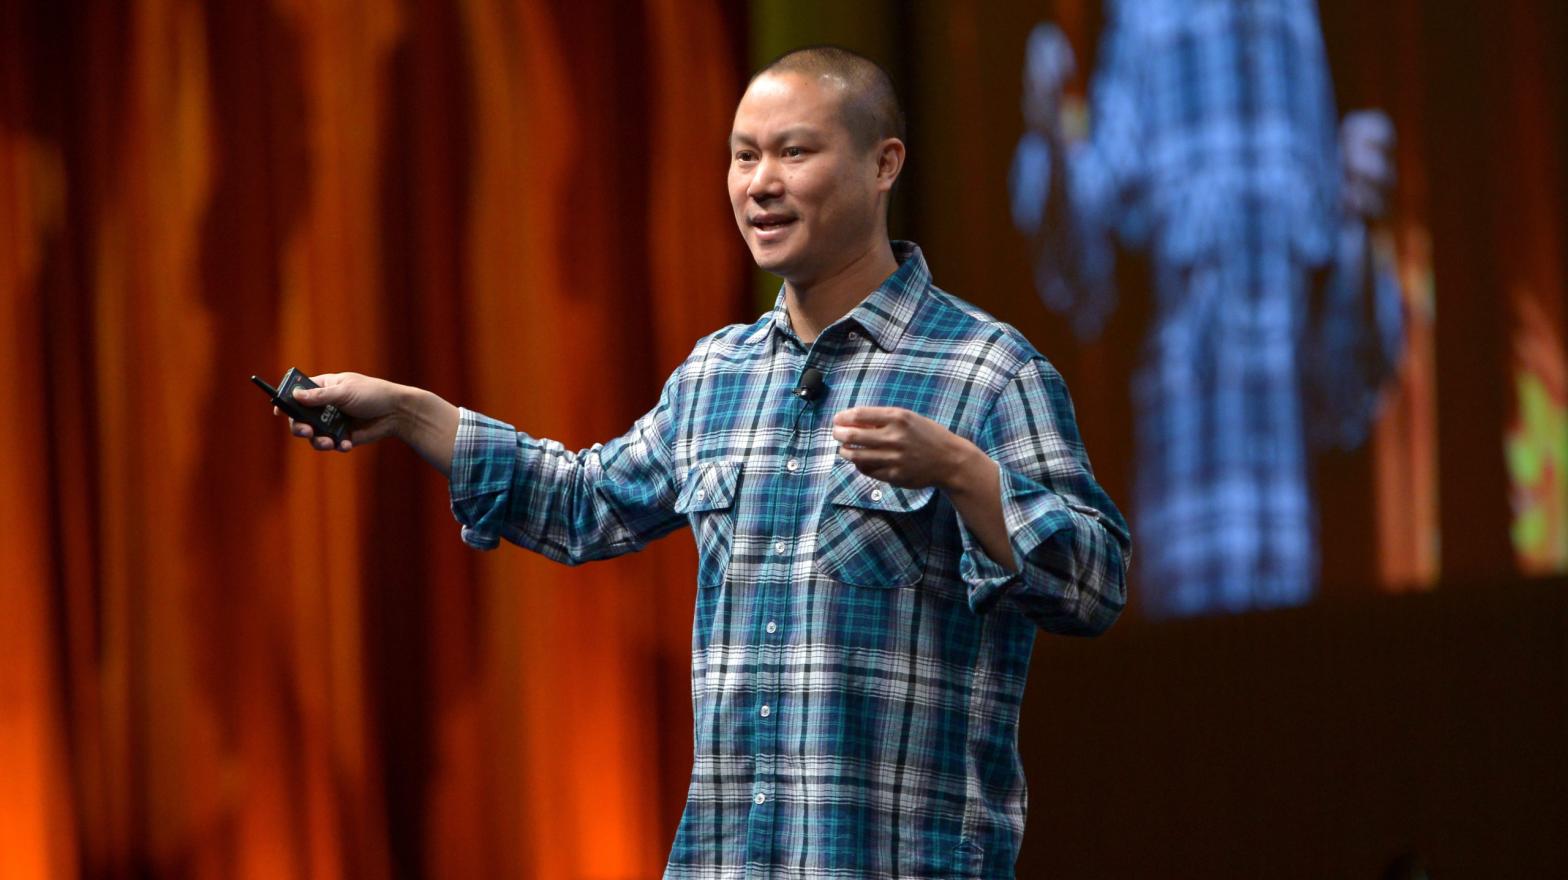 Former Zappos CEO Tony Hsieh, seen here at the 2014 CinemaCon in Las Vegas, Nevada, died at the age of 46 on Friday after sustaining injuries from a house fire. He had retired earlier this year following a 20-year tenure at the online shoe and clothing retailer.  (Photo: Charley Gallay, Getty Images)